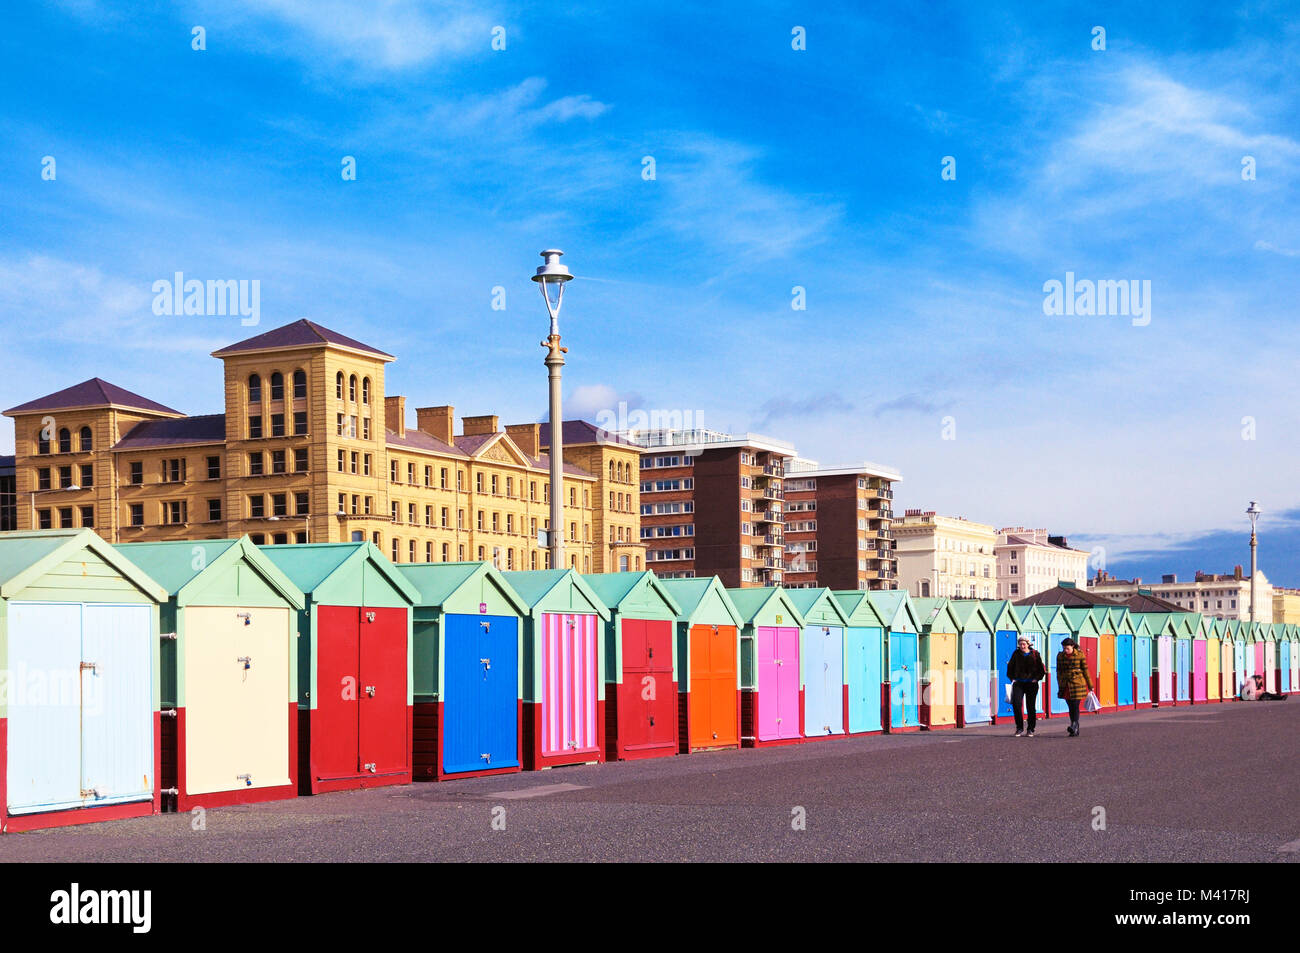 Colourful beach huts and hotchpotch architecture lining the seafront walk from Hove into Brighton, Brighton & Hove, East Sussex, UK Stock Photo